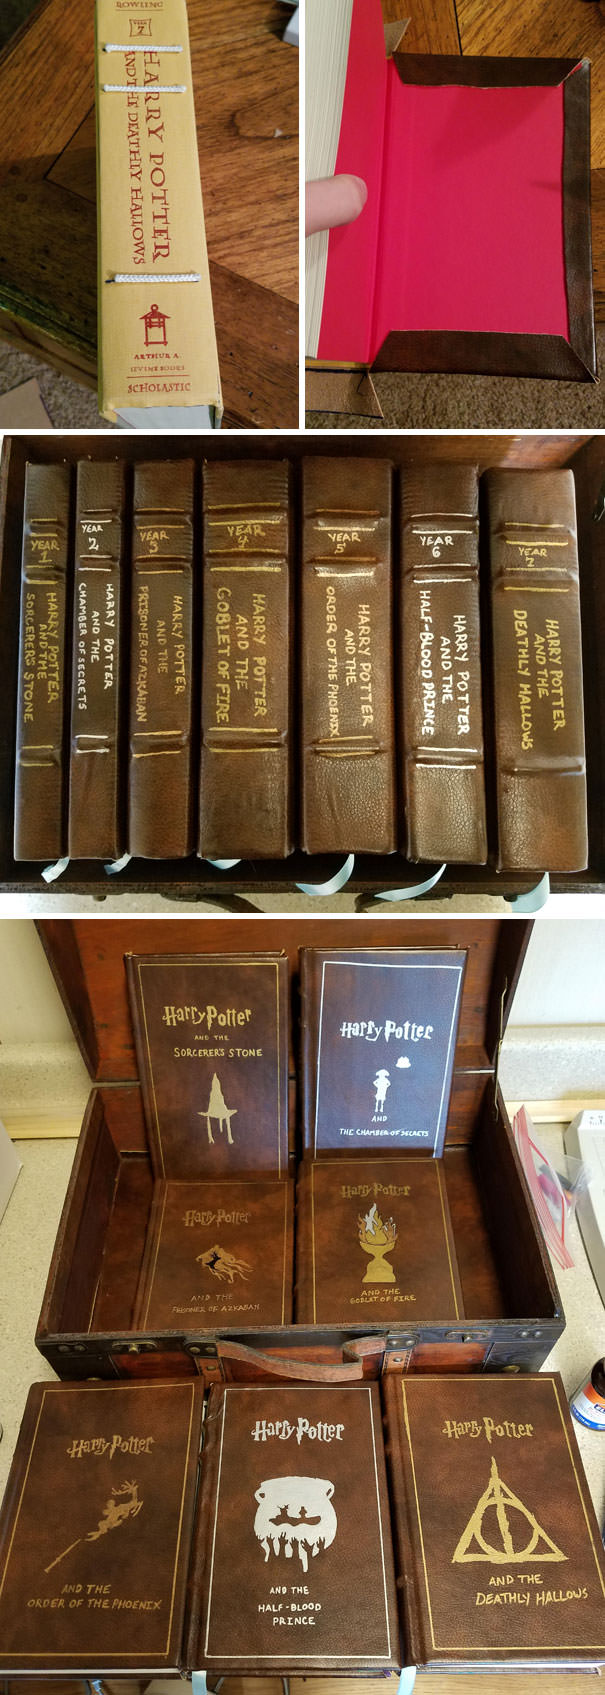 Made leather-bound copies of the Harry Potter books for my wife for Christmas.